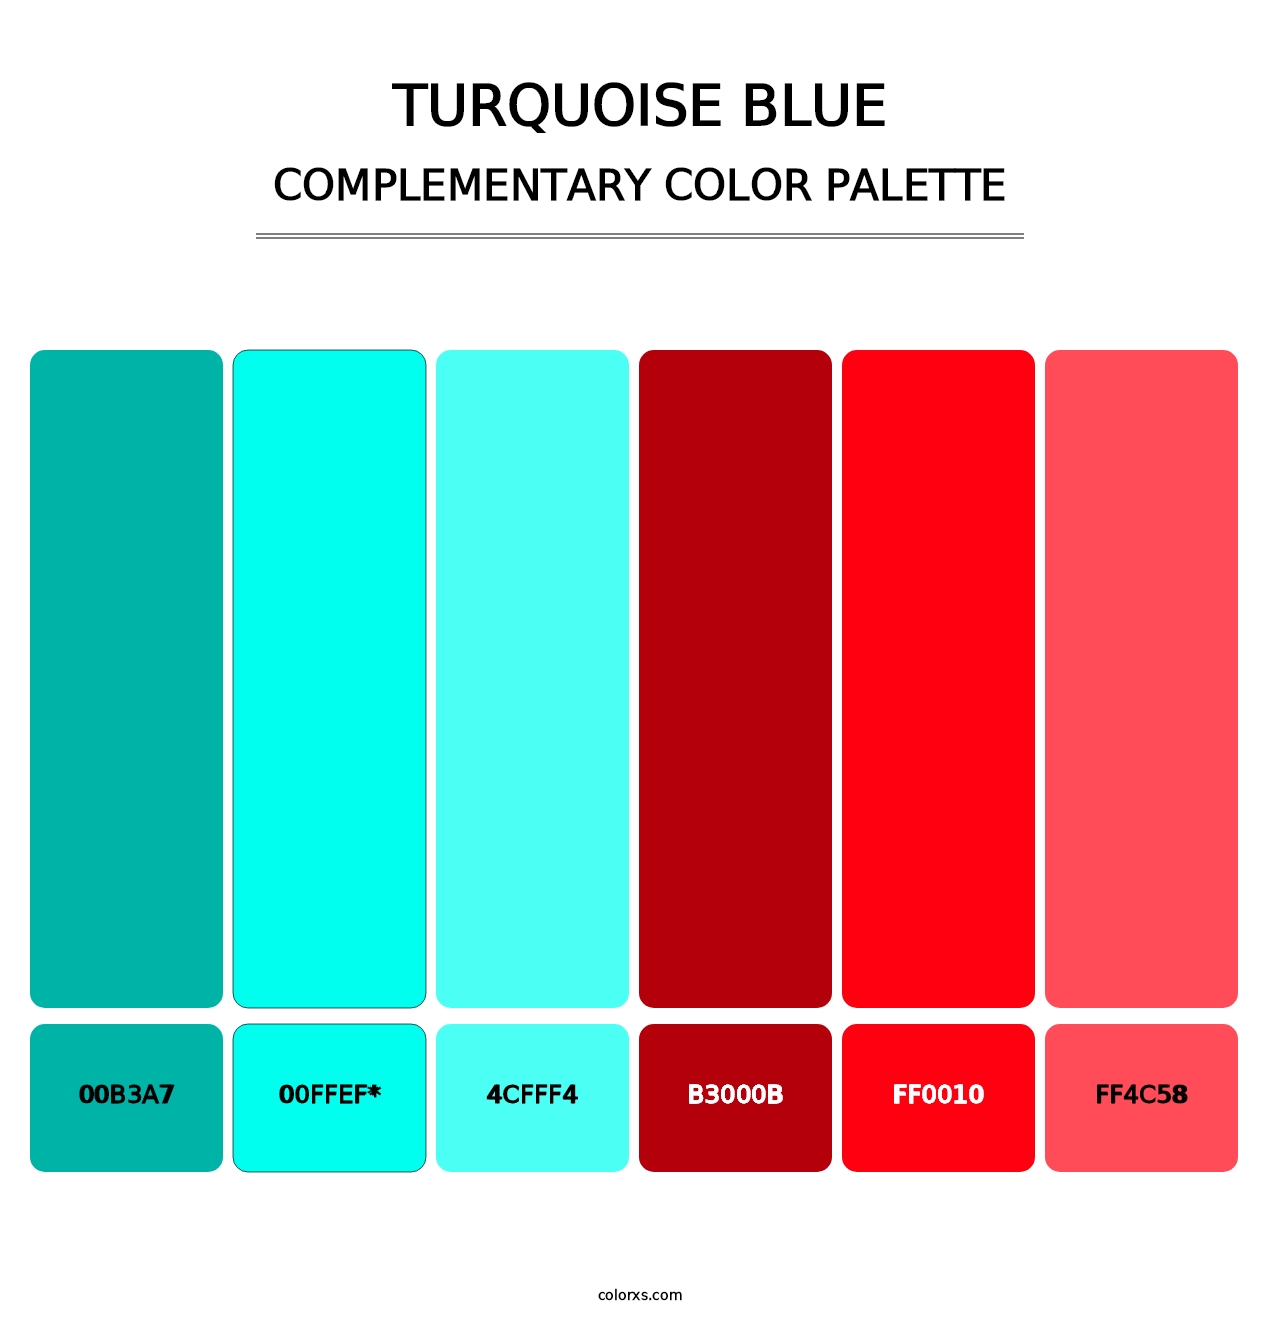 Turquoise Blue - Complementary Color Palette